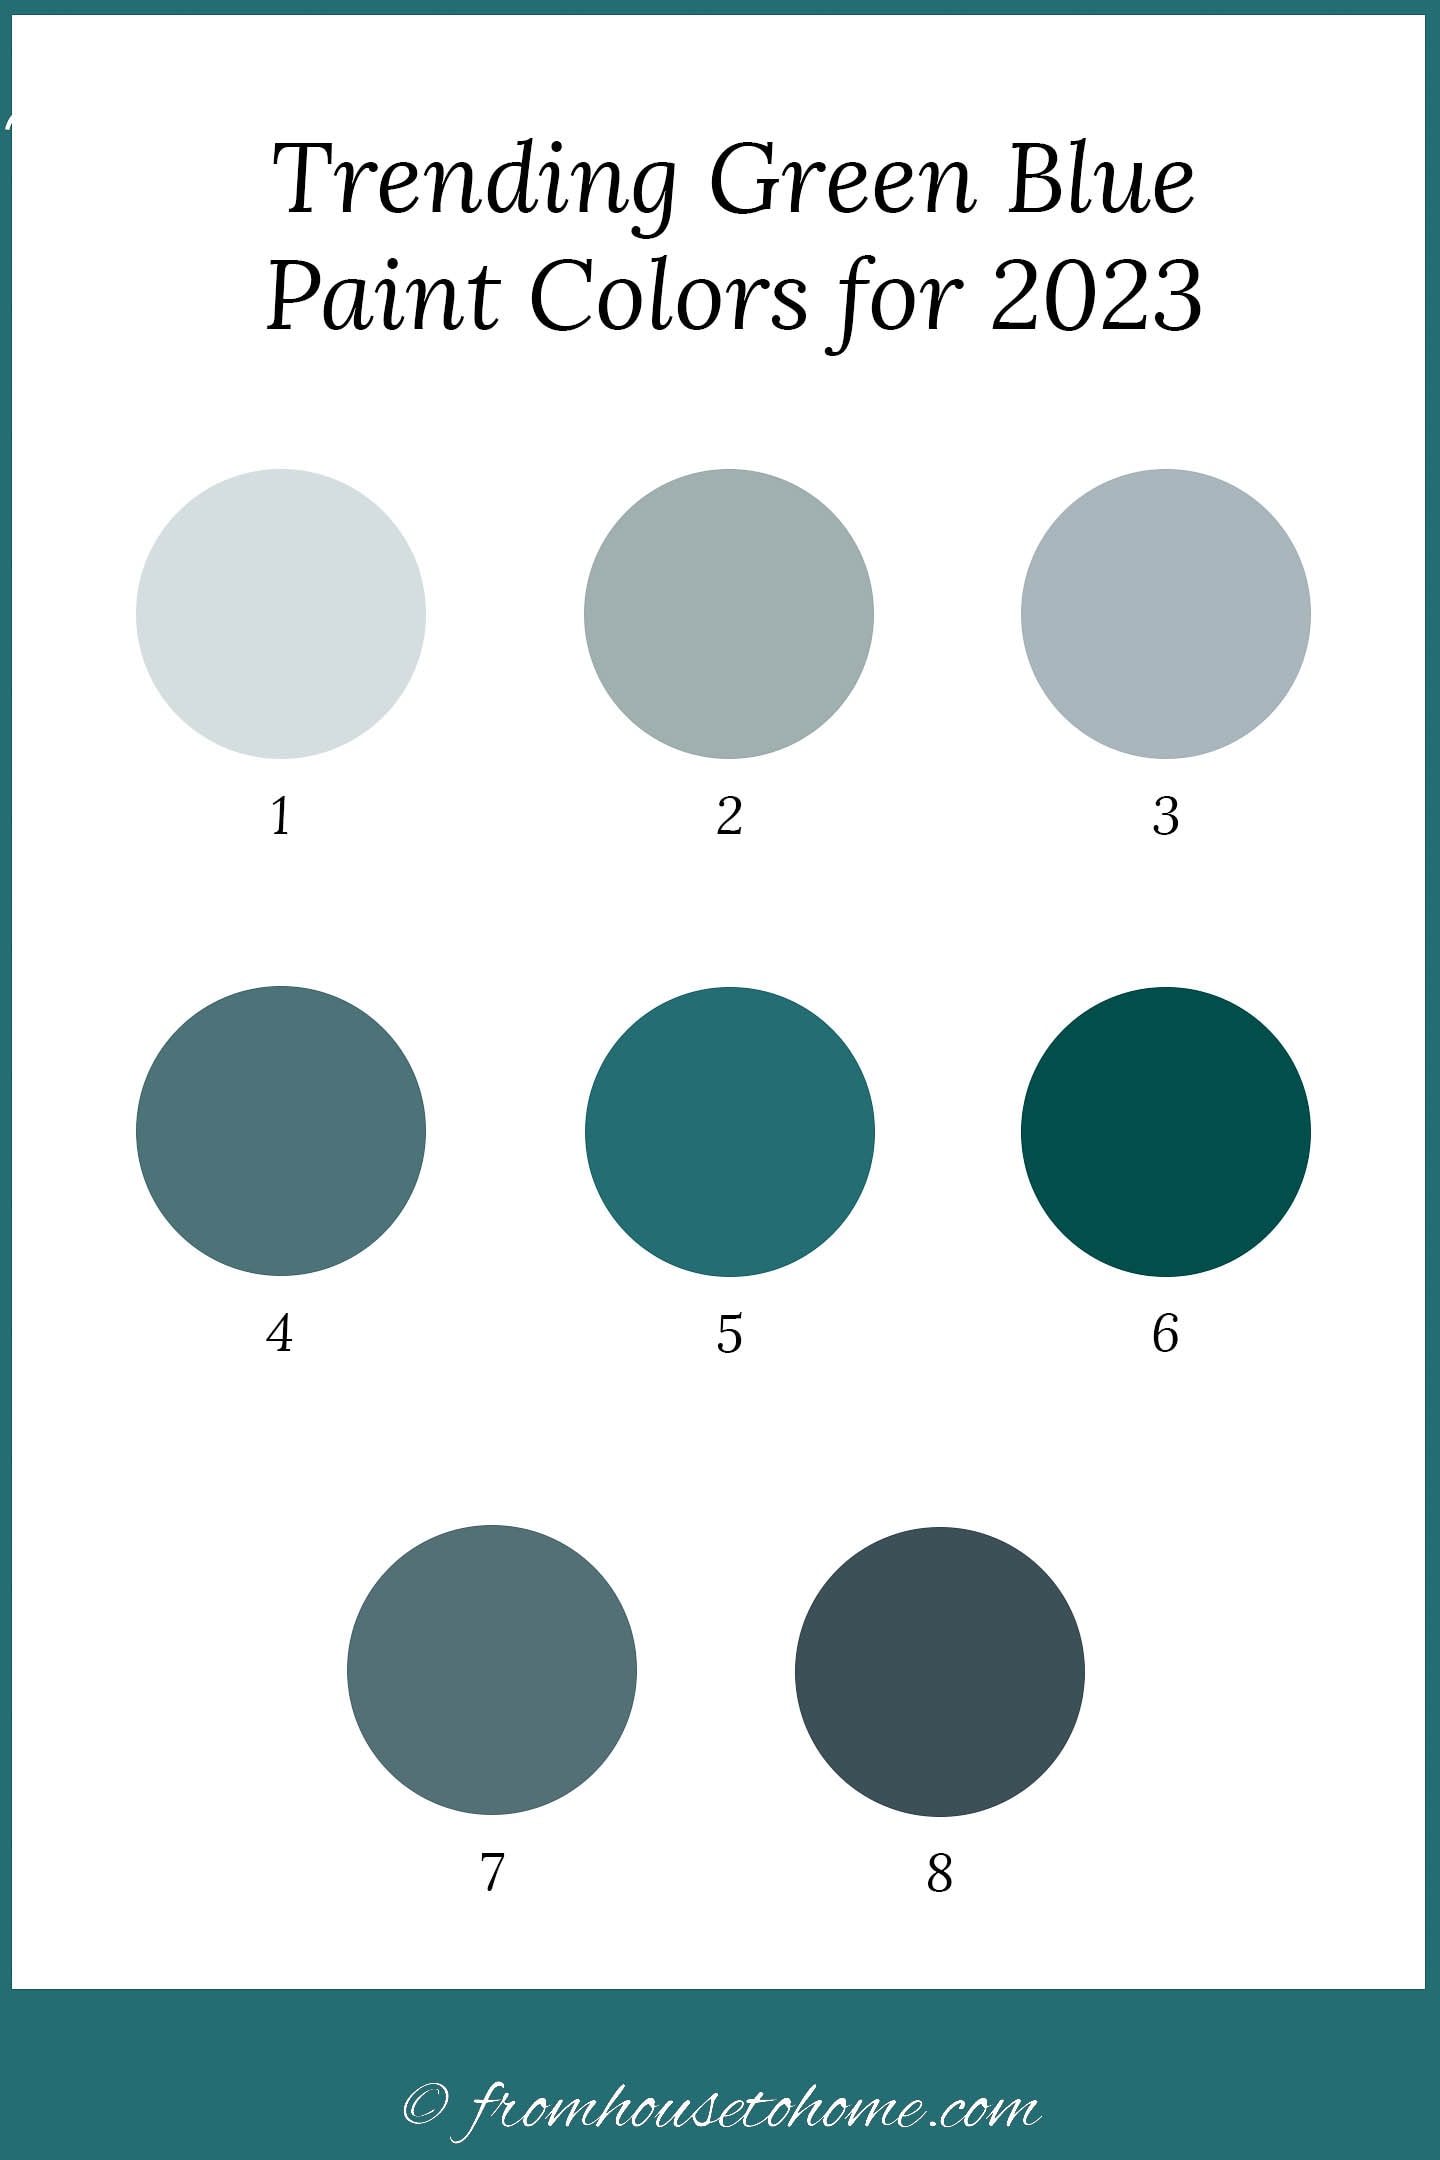 8 paint swatches of trending green-blue paint colors